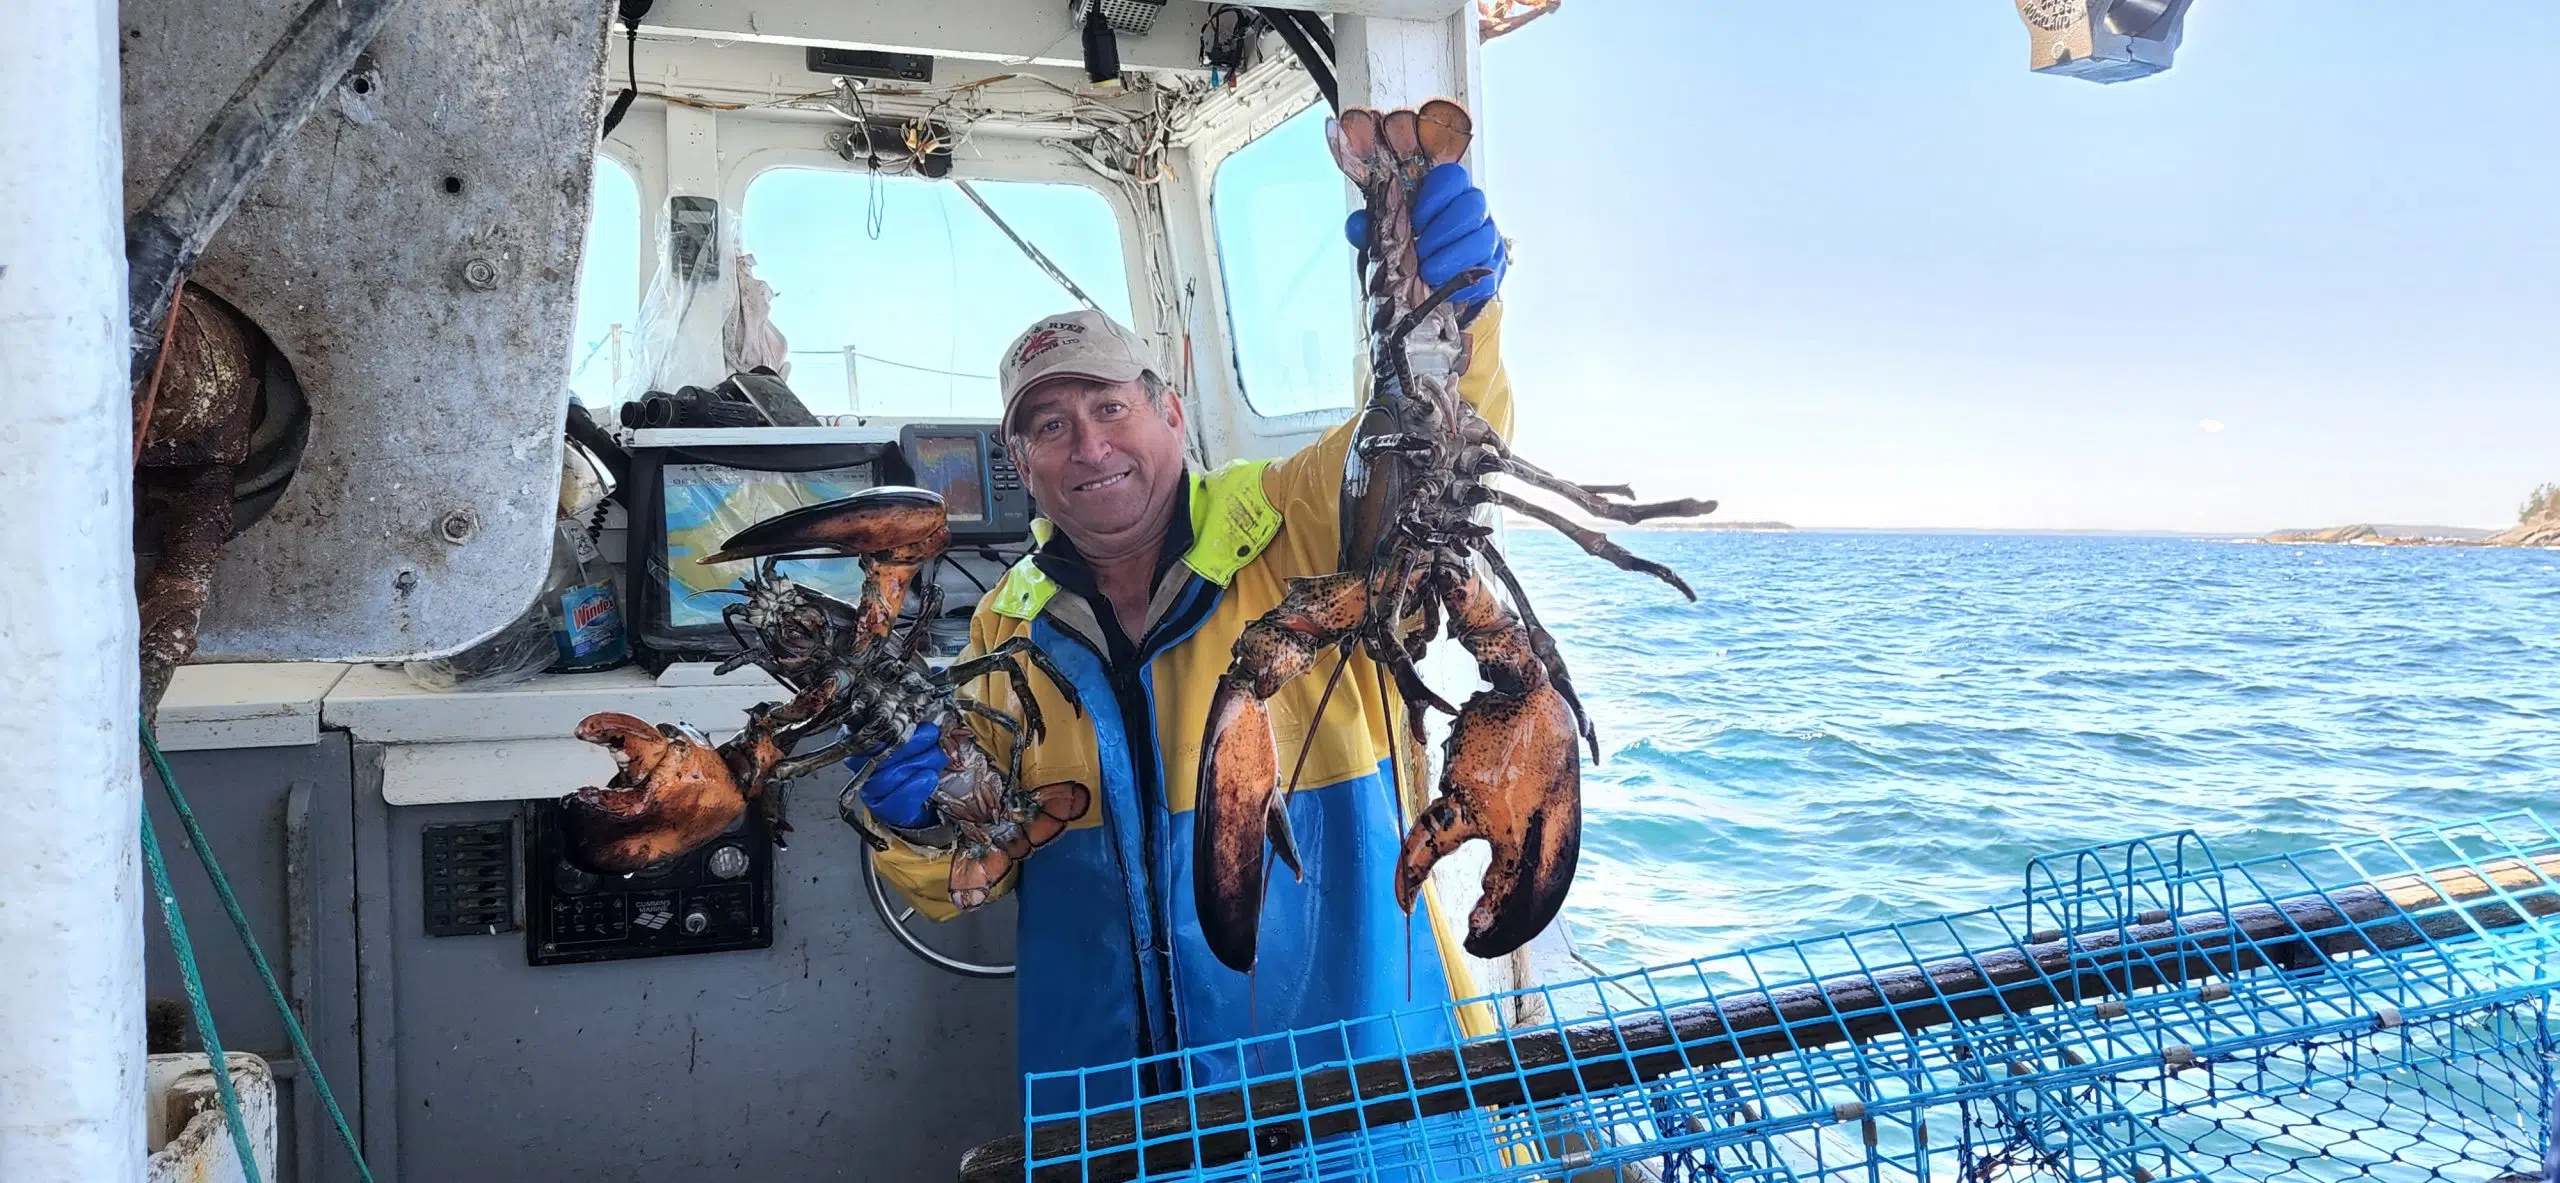 How's Lobstering Dave Handling the Fame?